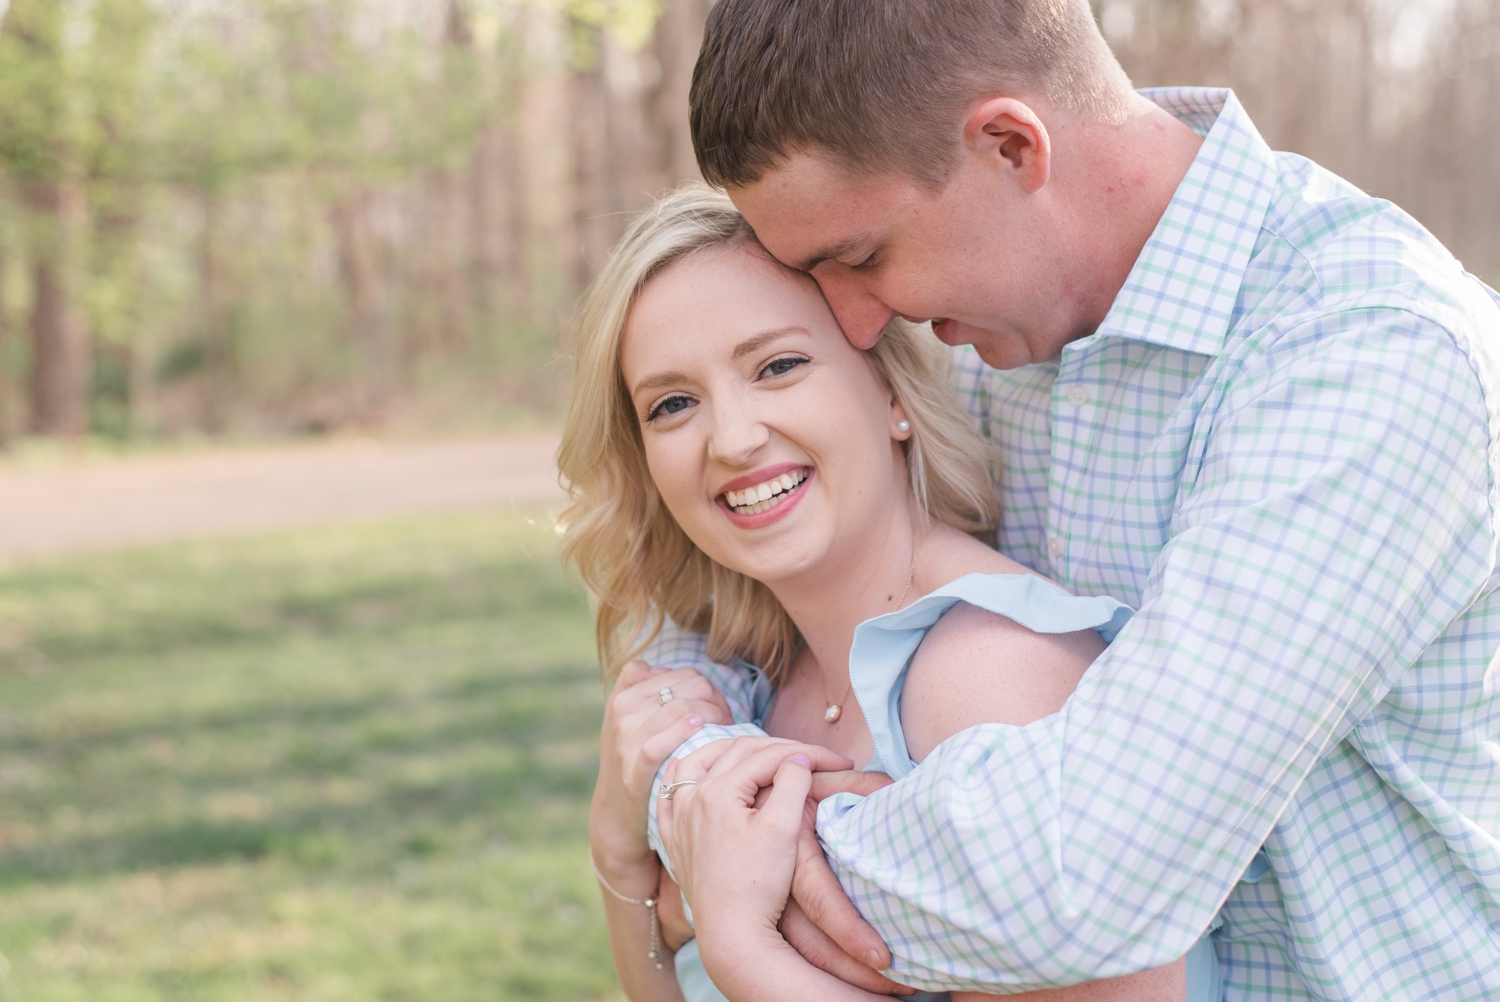 Spring Country Sunset Engagement Photos by Rose Courts Photography, Wedding Photographer in Indiana